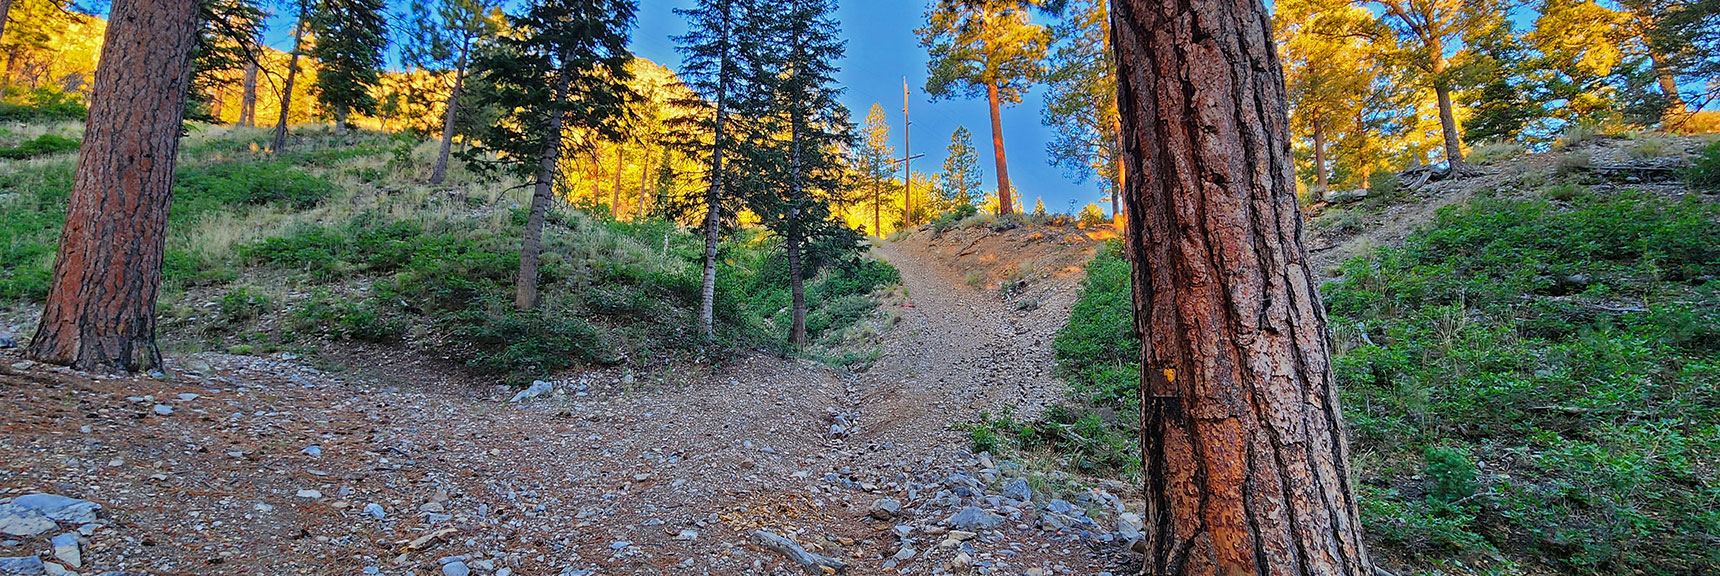 Prior Image: View Back Where Sharp Descent Marks Point to Take Road Branch Toward Acastus Trail | Harris Mountain Triangle | Mt Charleston Wilderness, Nevada